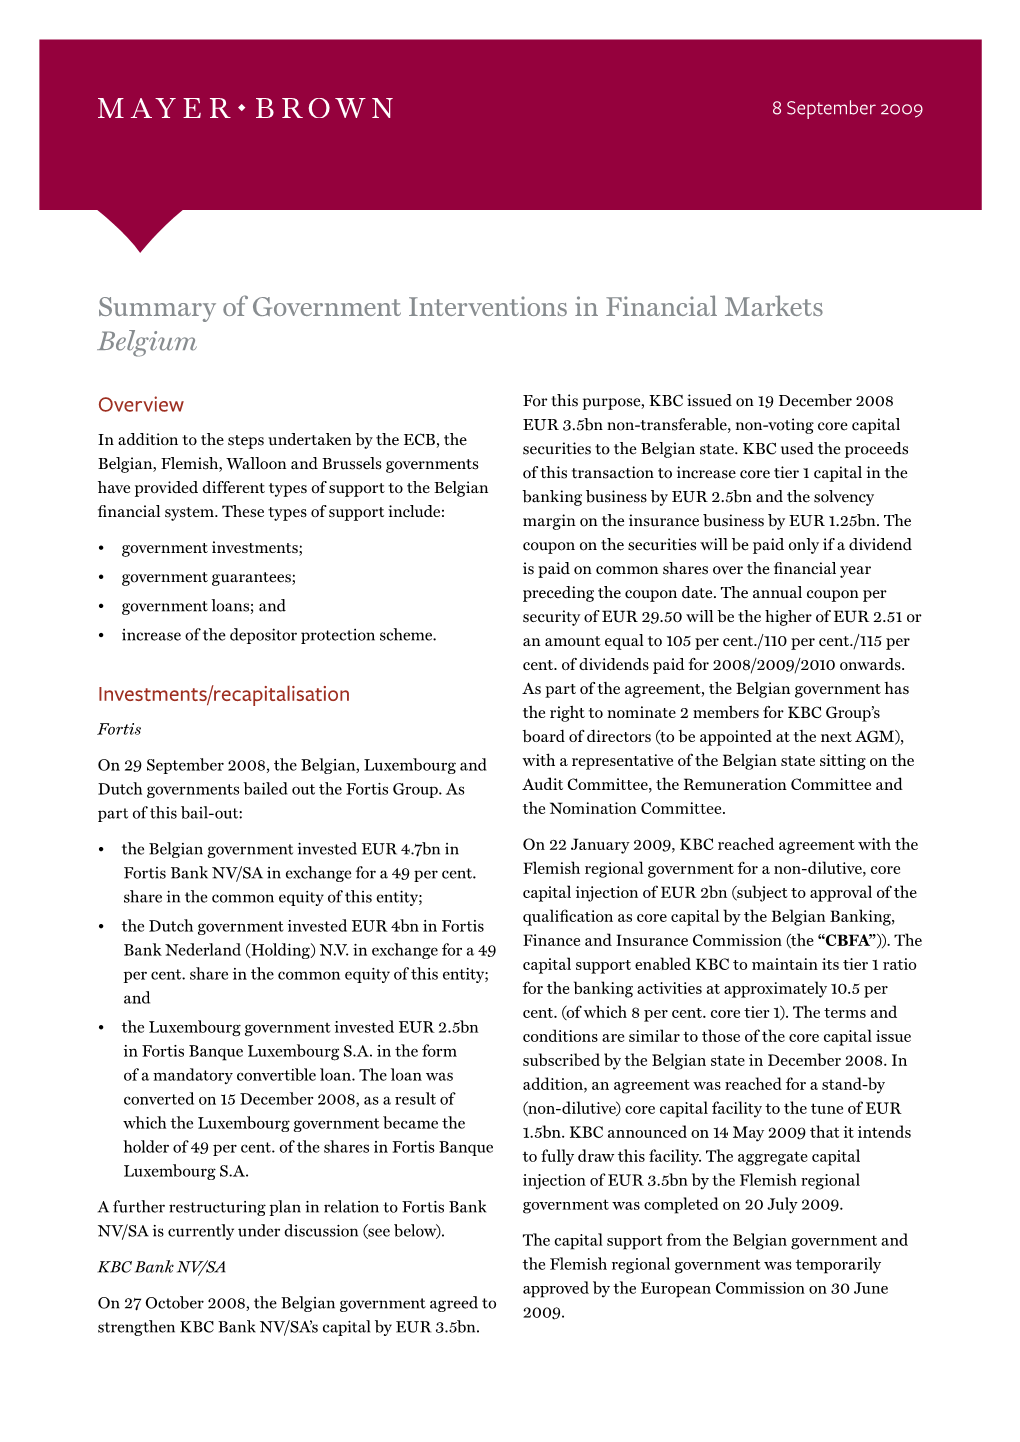 Summary of Government Interventions in Financial Markets Belgium